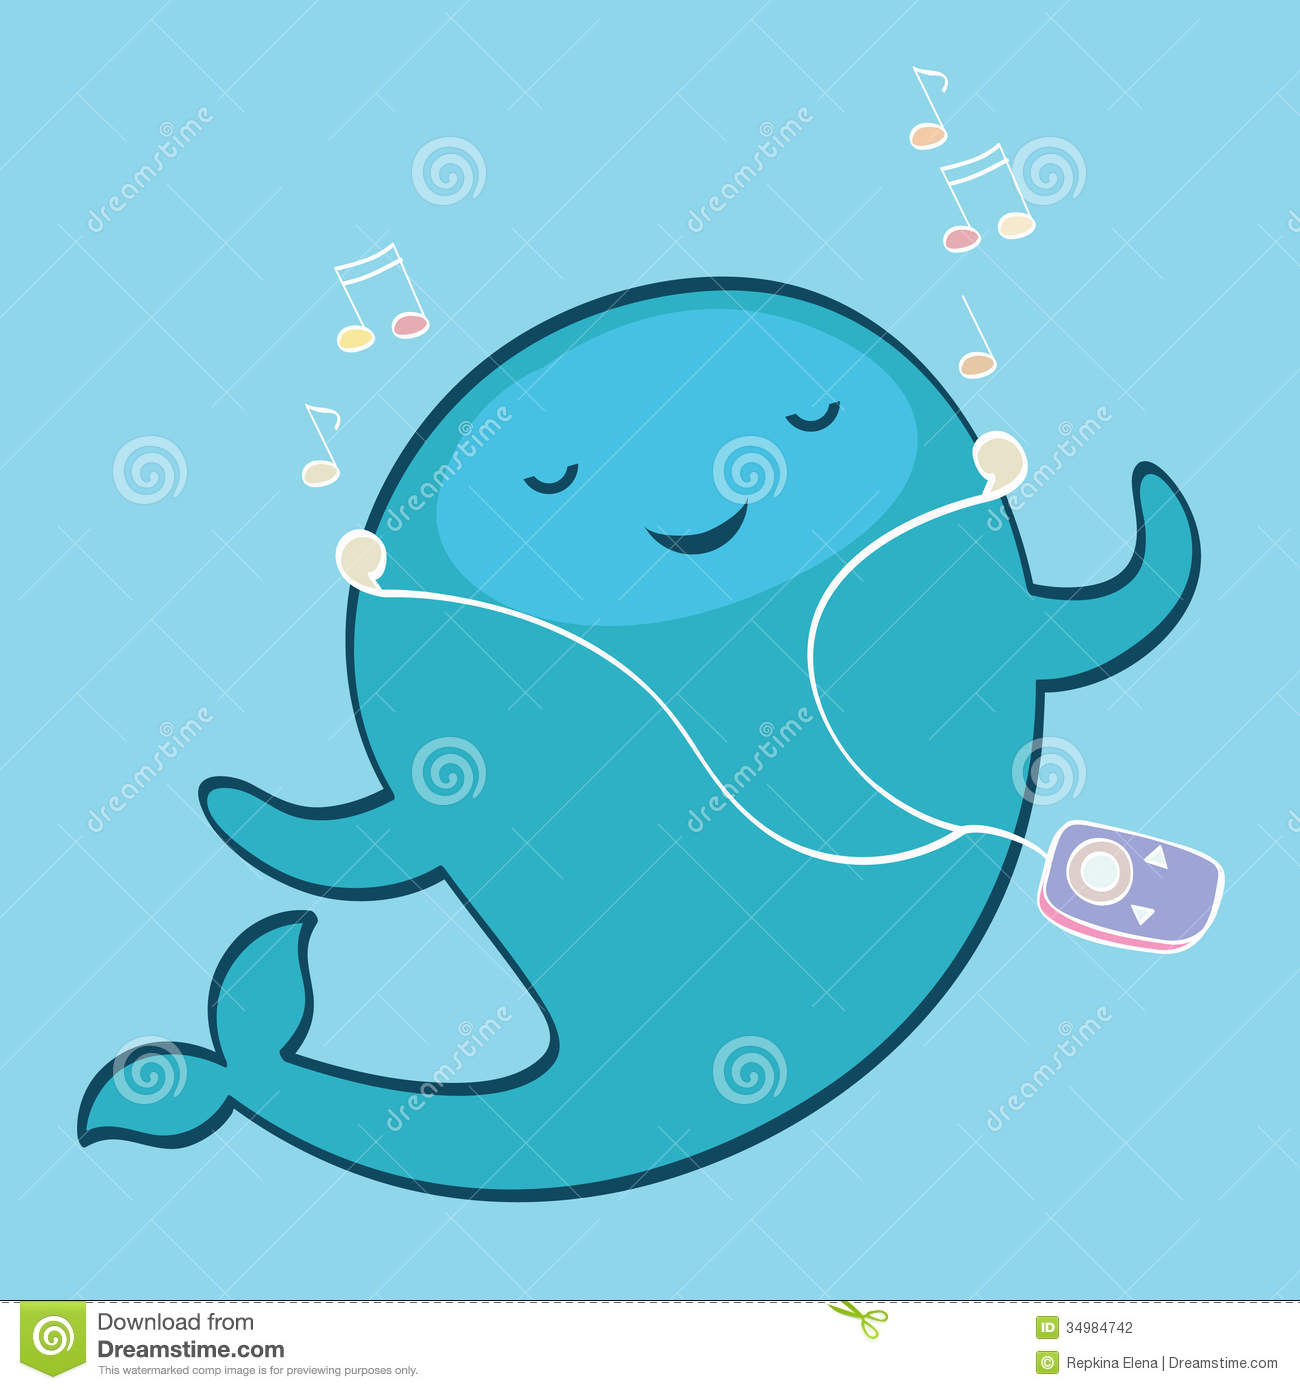 Cute Whale Wallpaper With Music Player